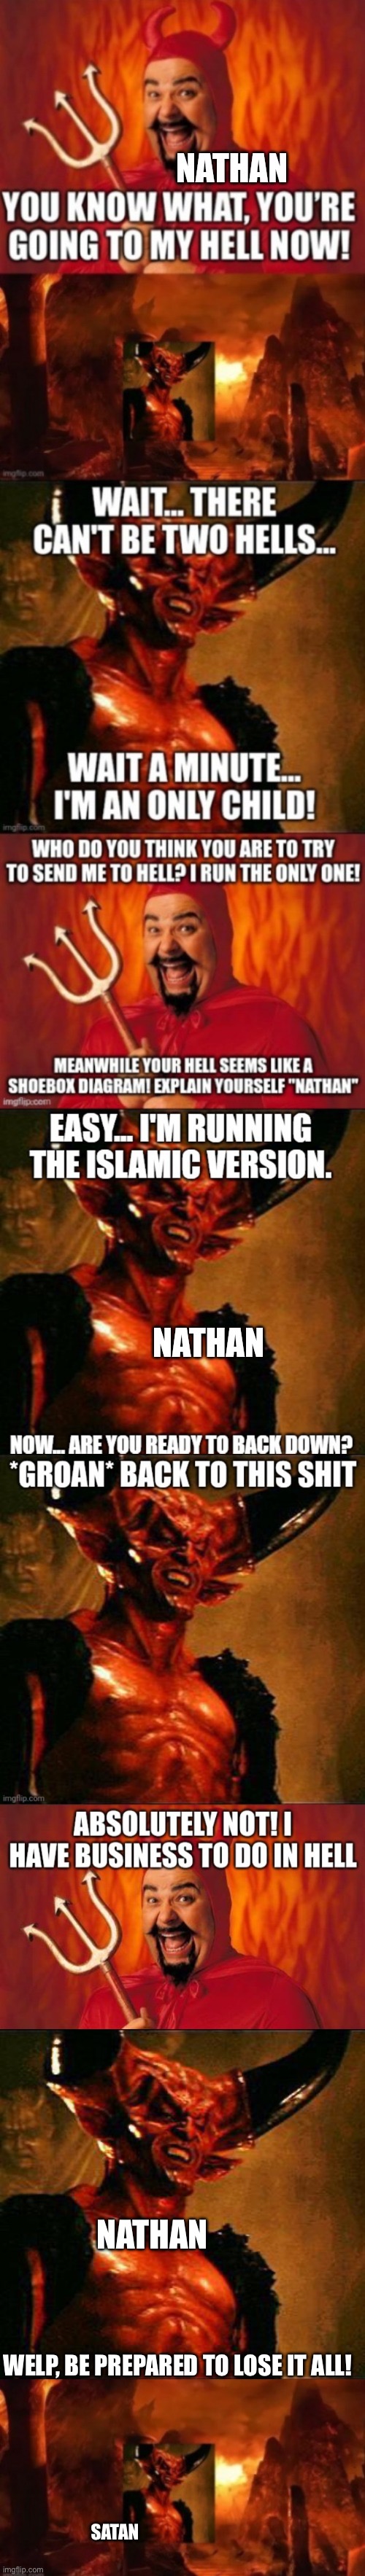 Nathan does not give a shit | NATHAN; WELP, BE PREPARED TO LOSE IT ALL! SATAN | image tagged in satan | made w/ Imgflip meme maker